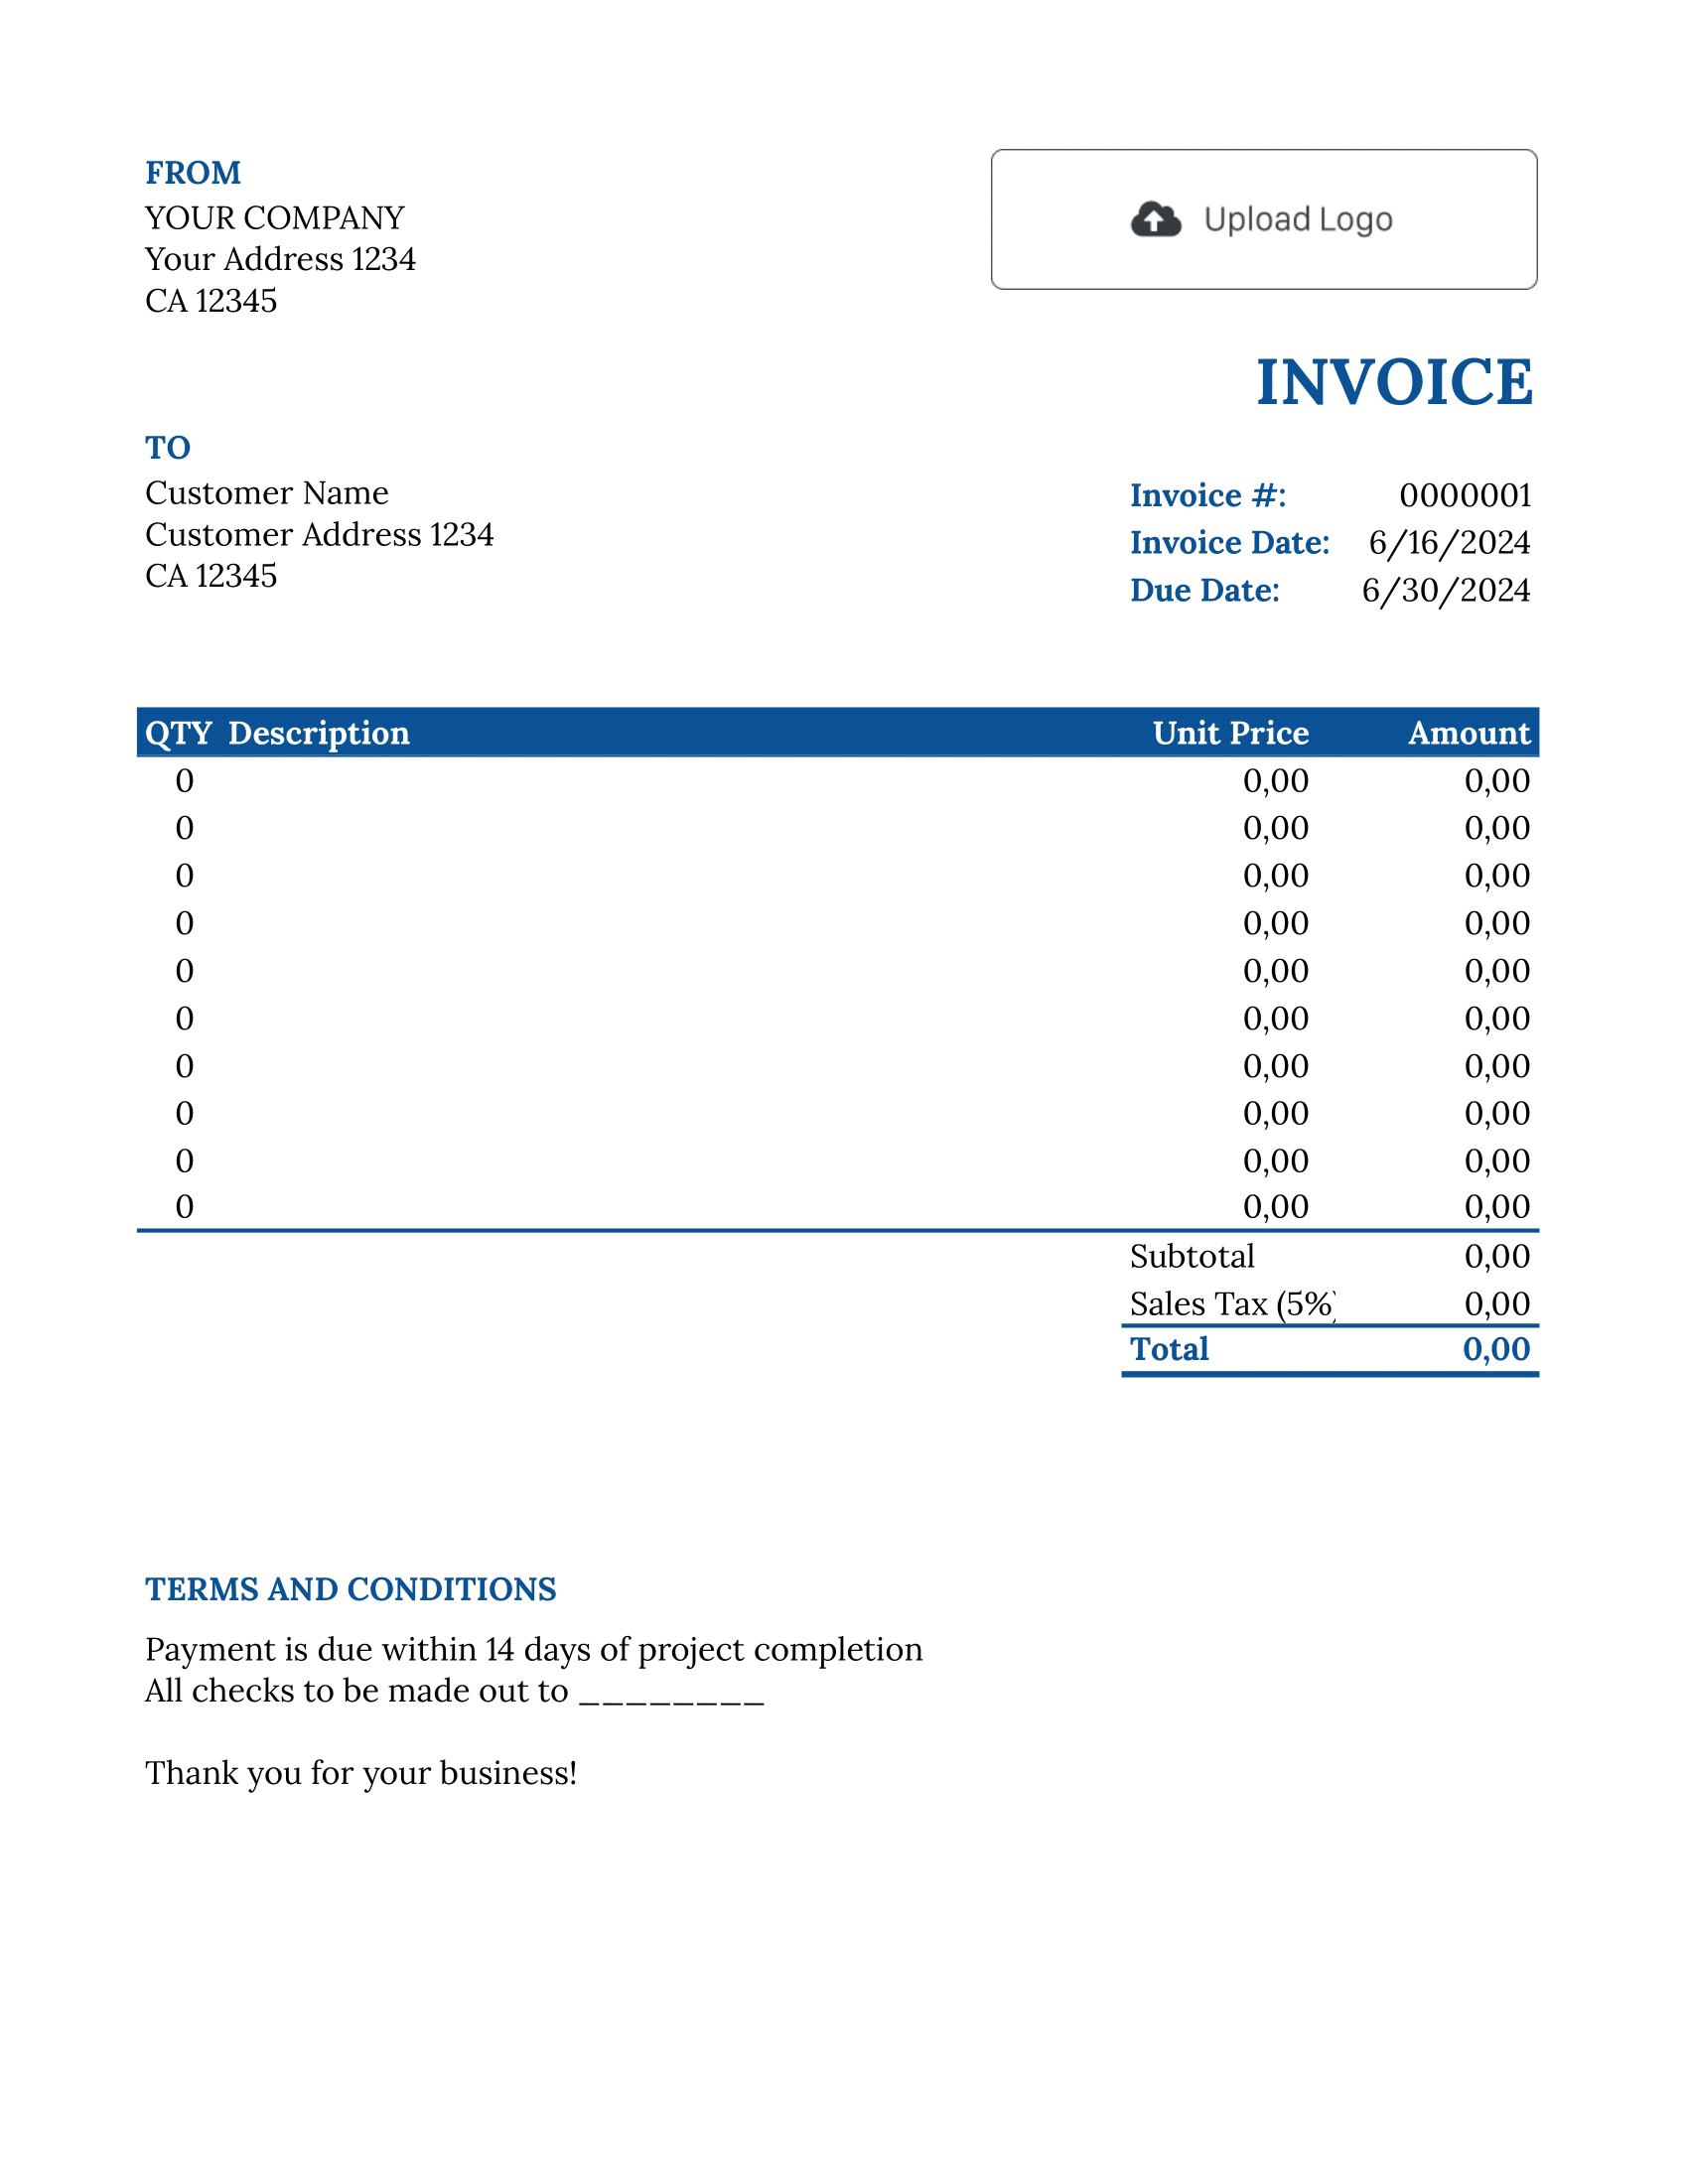 Itemized Google Sheets Invoice Template